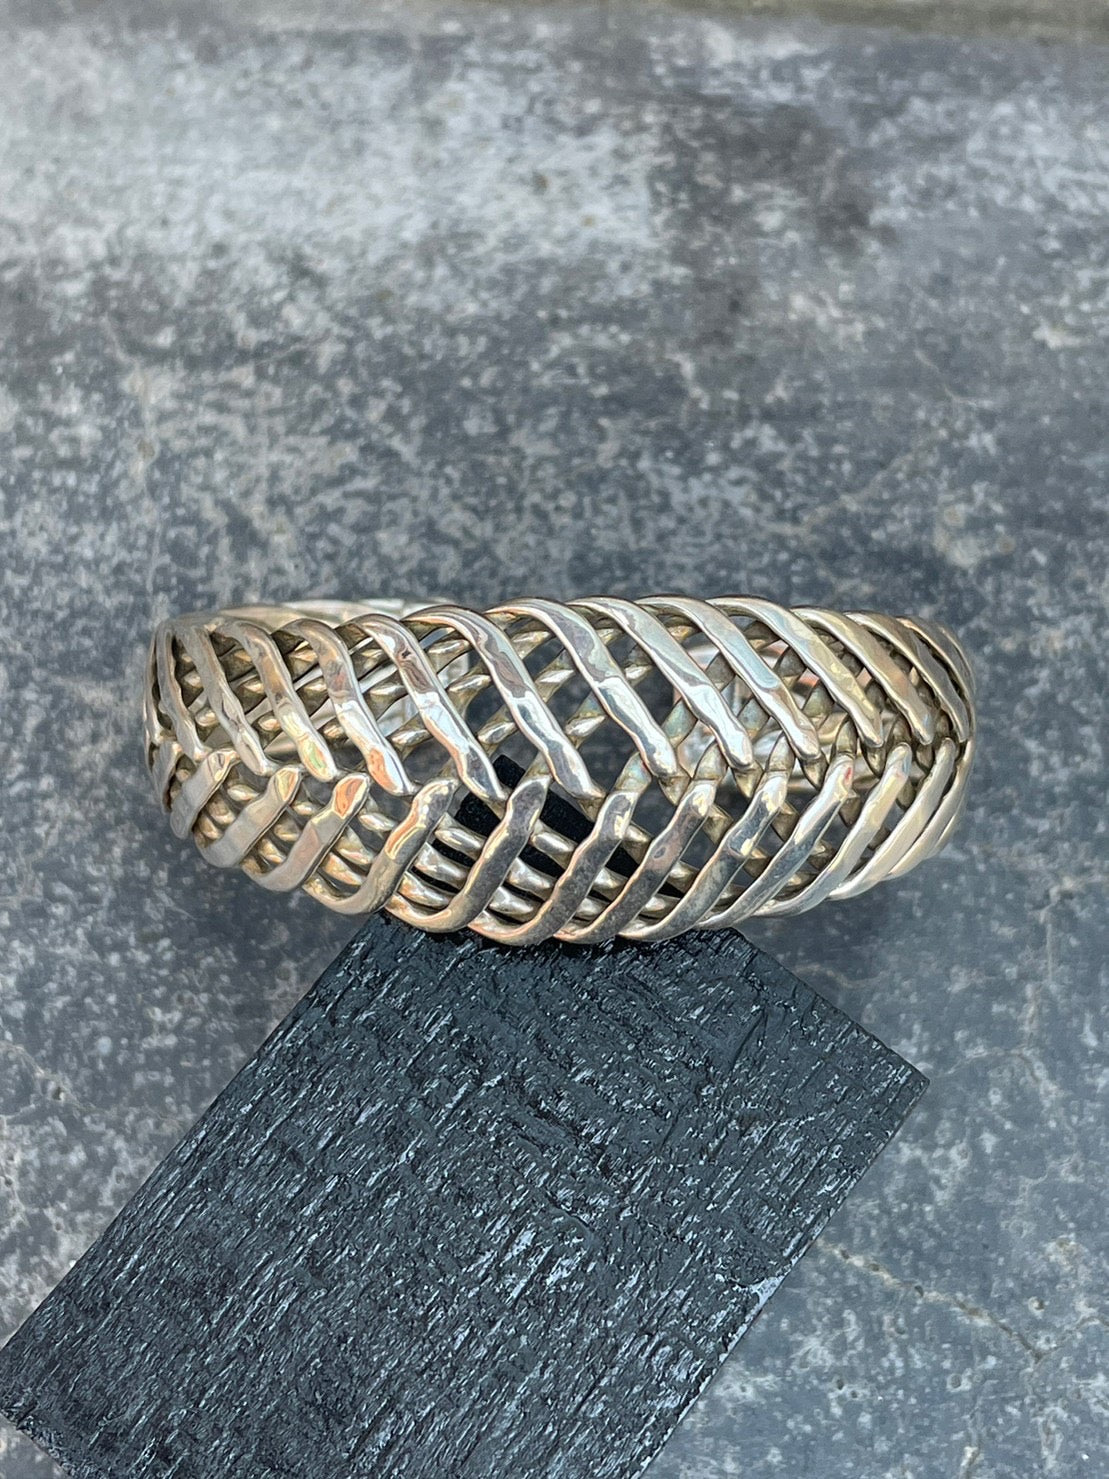 ［DEAD STOCK］VINTAGE MEXICAN JEWELY BANGLE